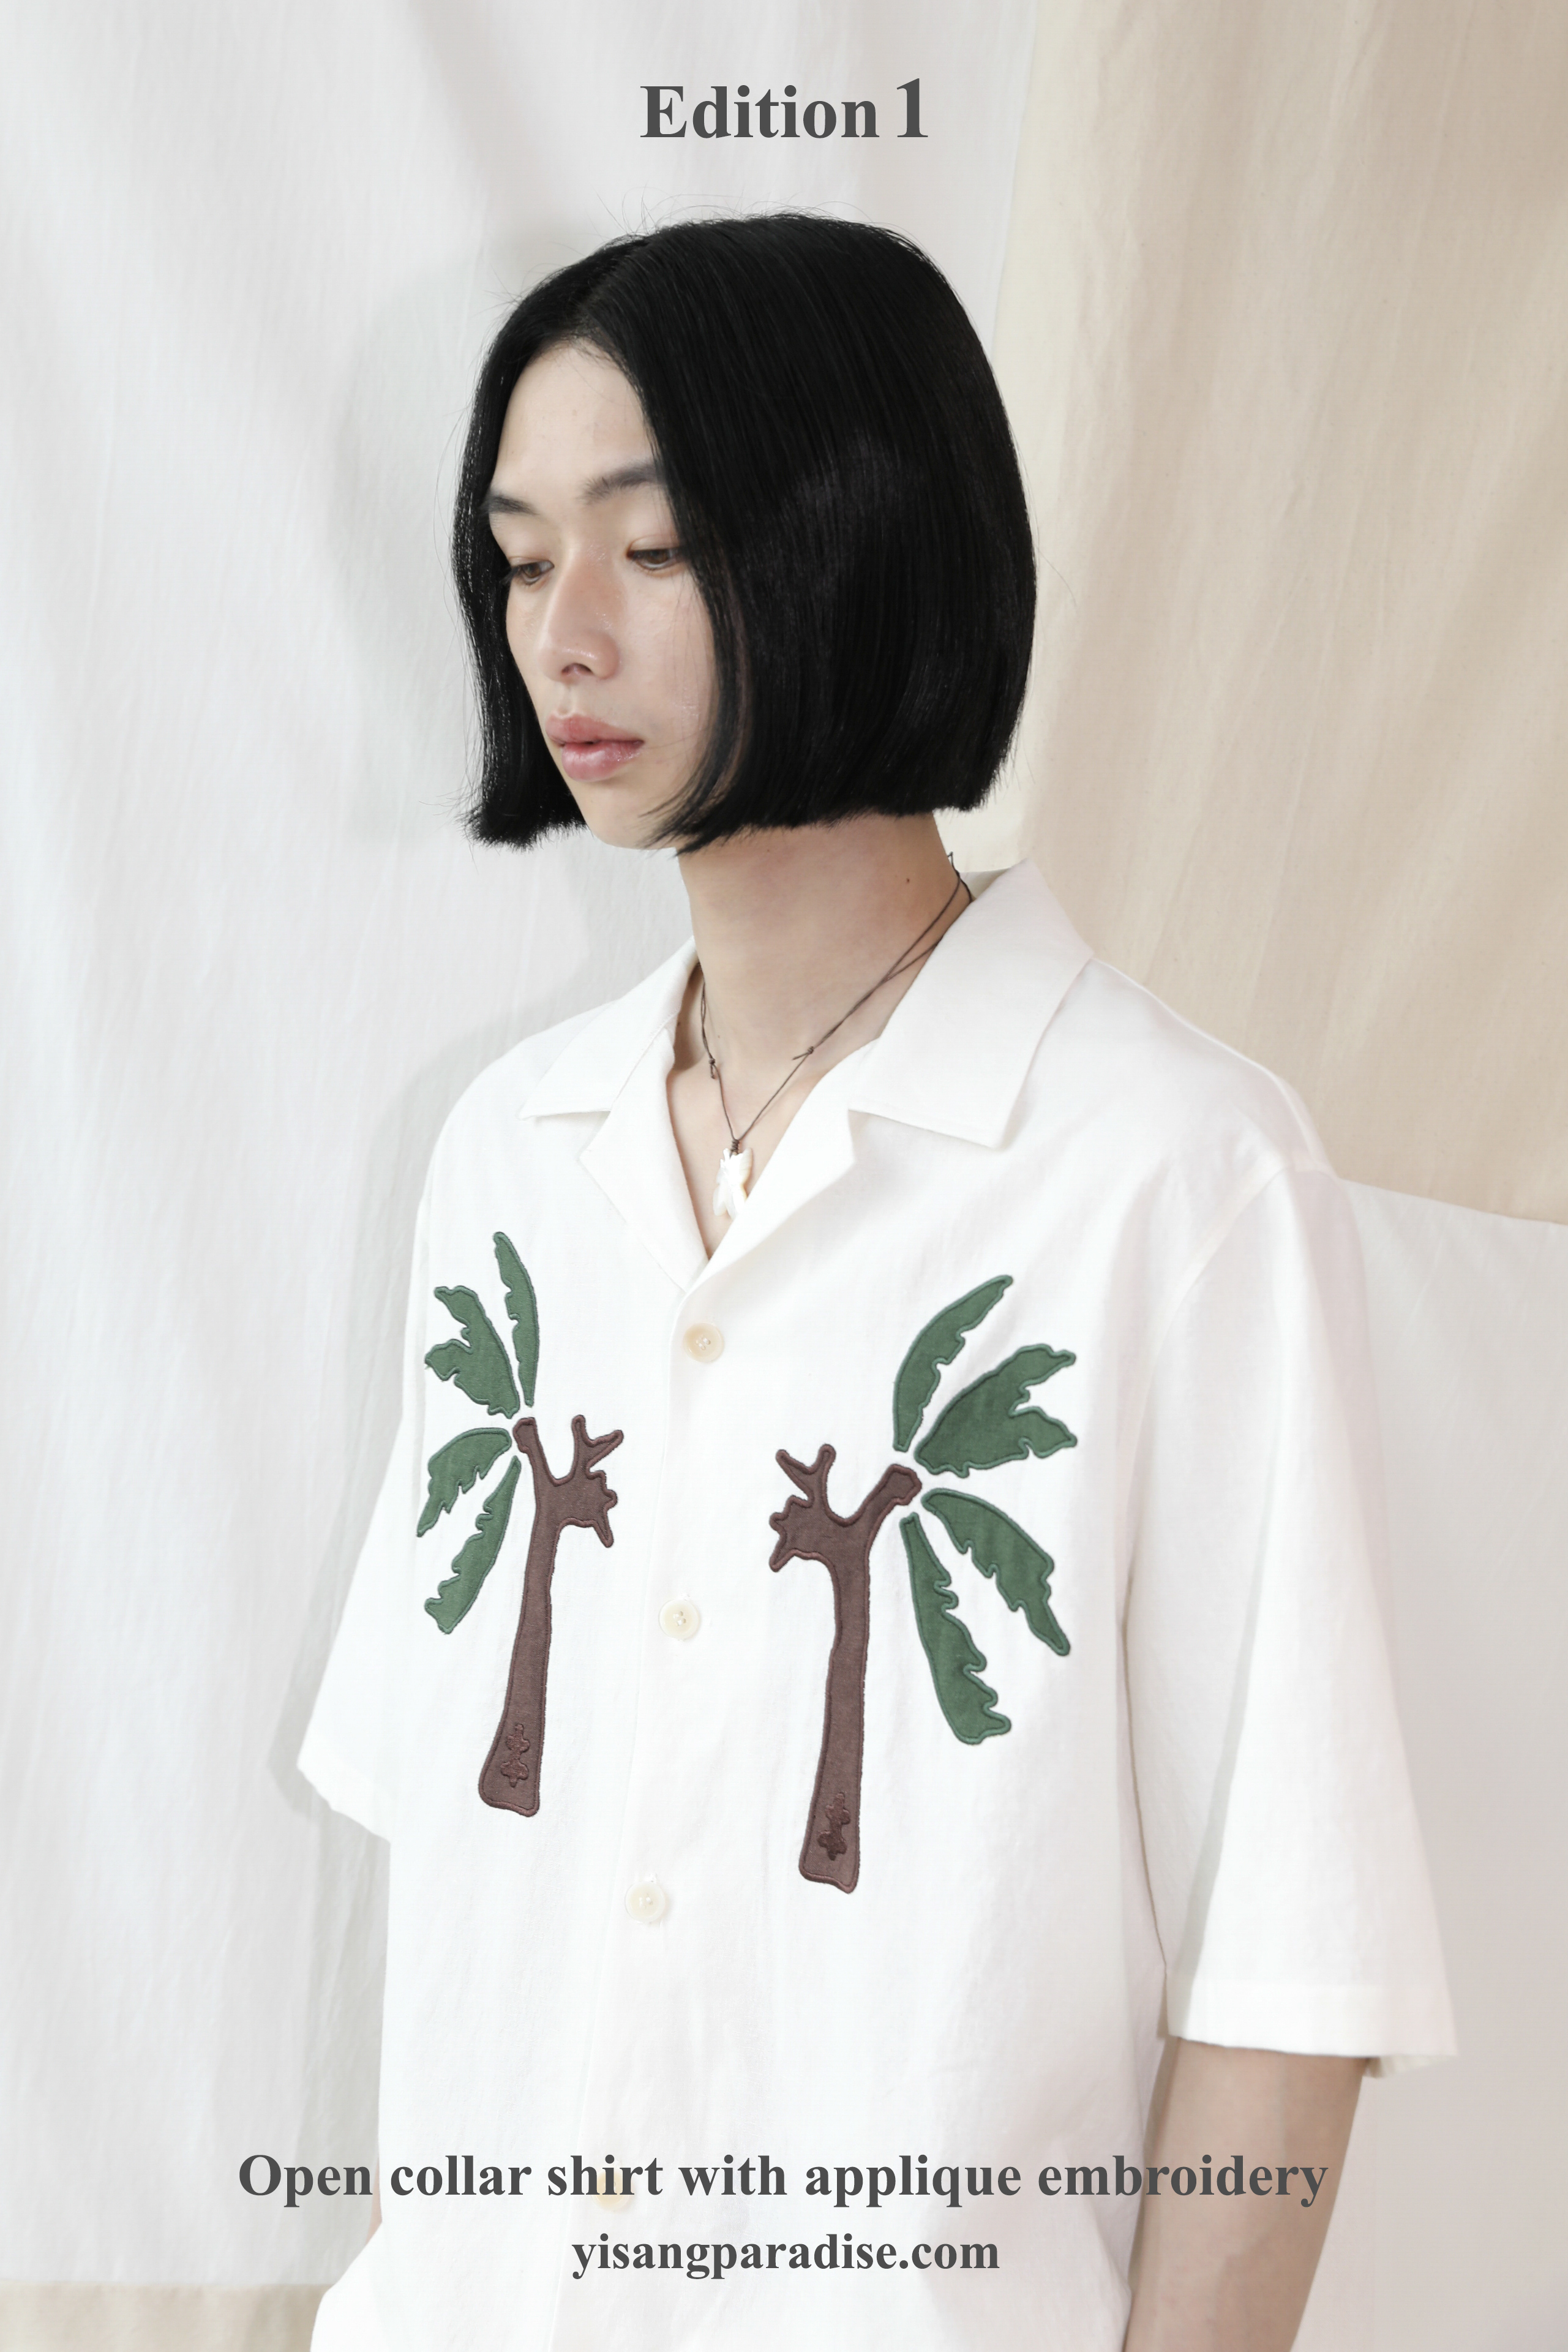 Edition 1. Open collar shirt with applique embroidery